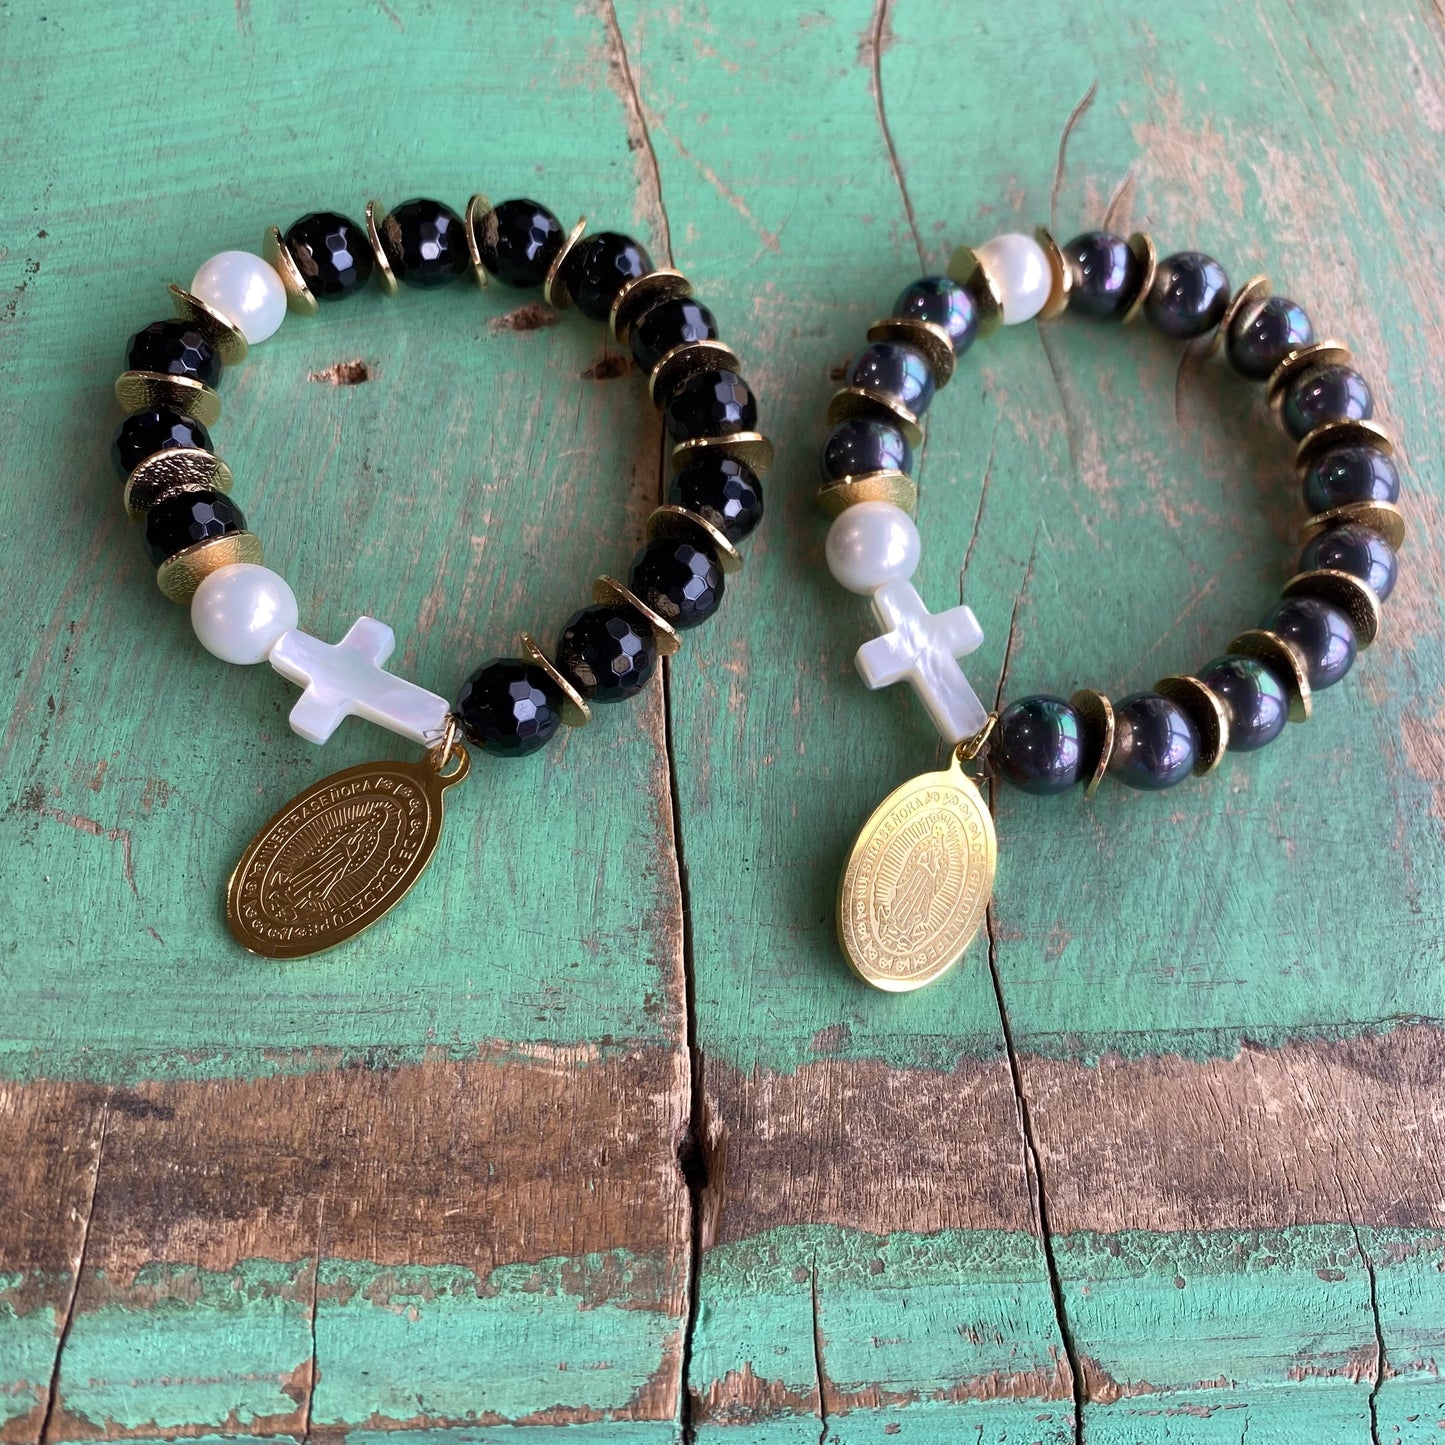 Mother of Pearl Rosary Bracelet